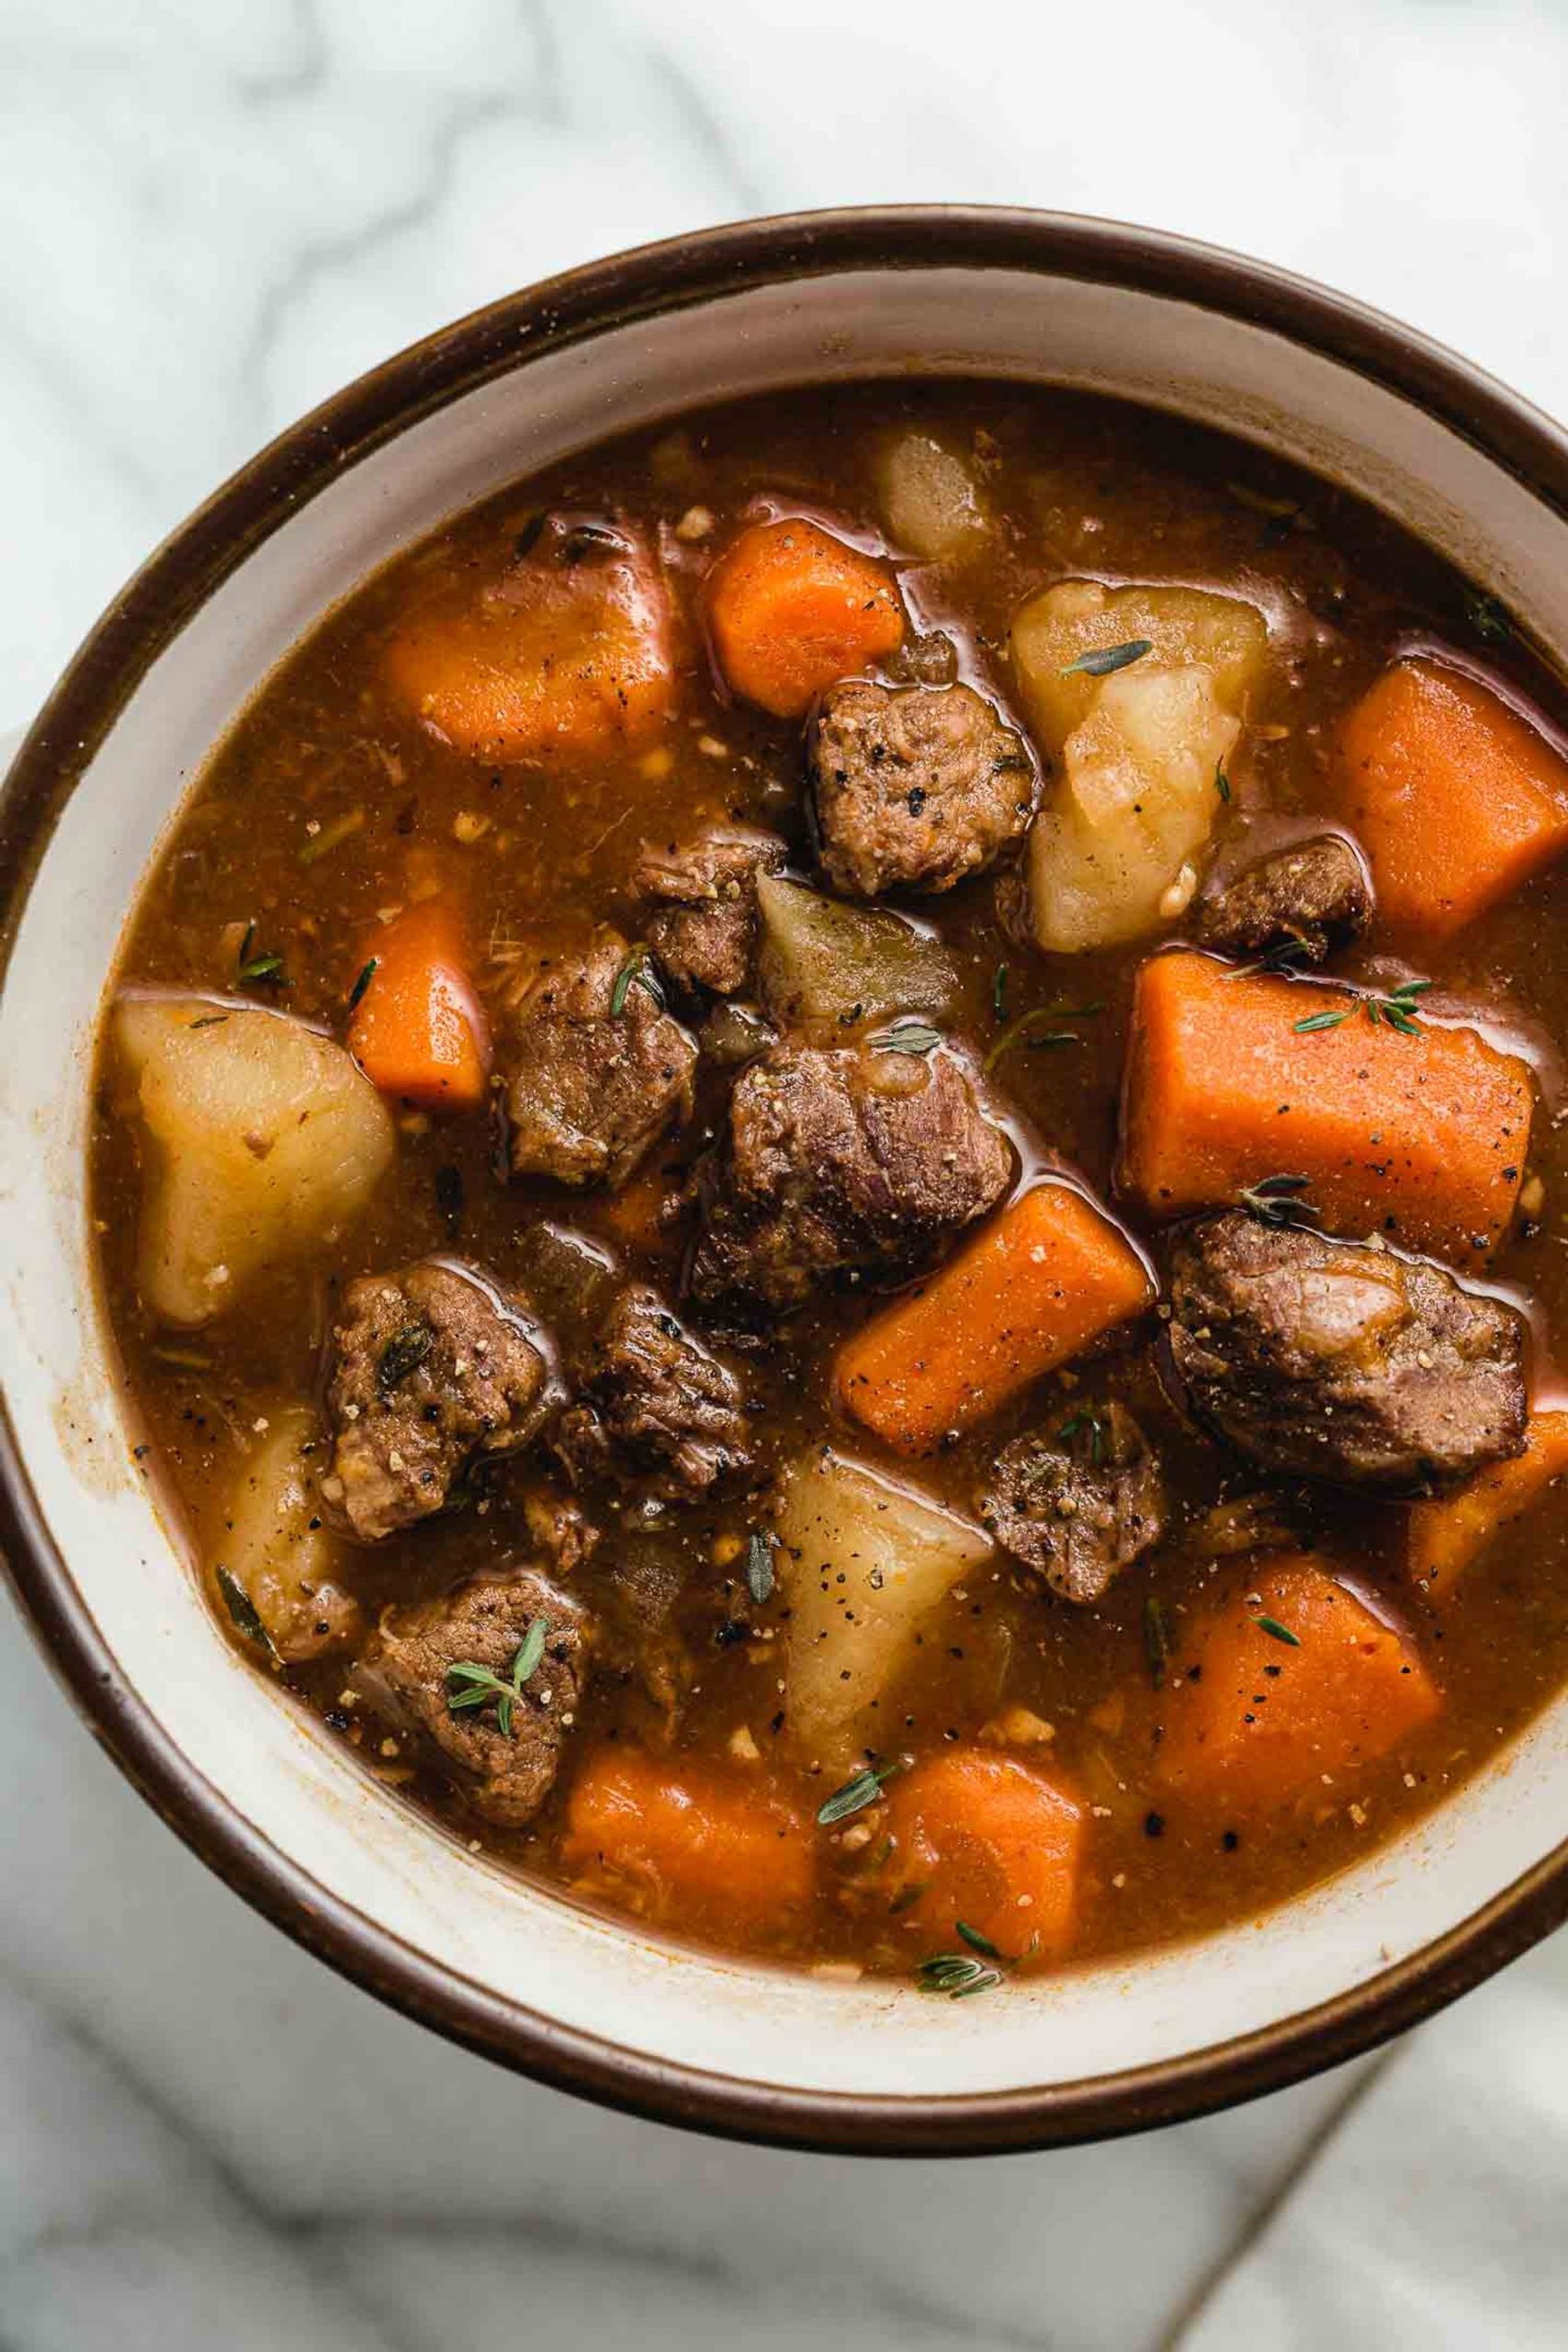 Instant Pot Recipes with Hamburger Elegant Instant Pot Beef Stew Rich and Savory